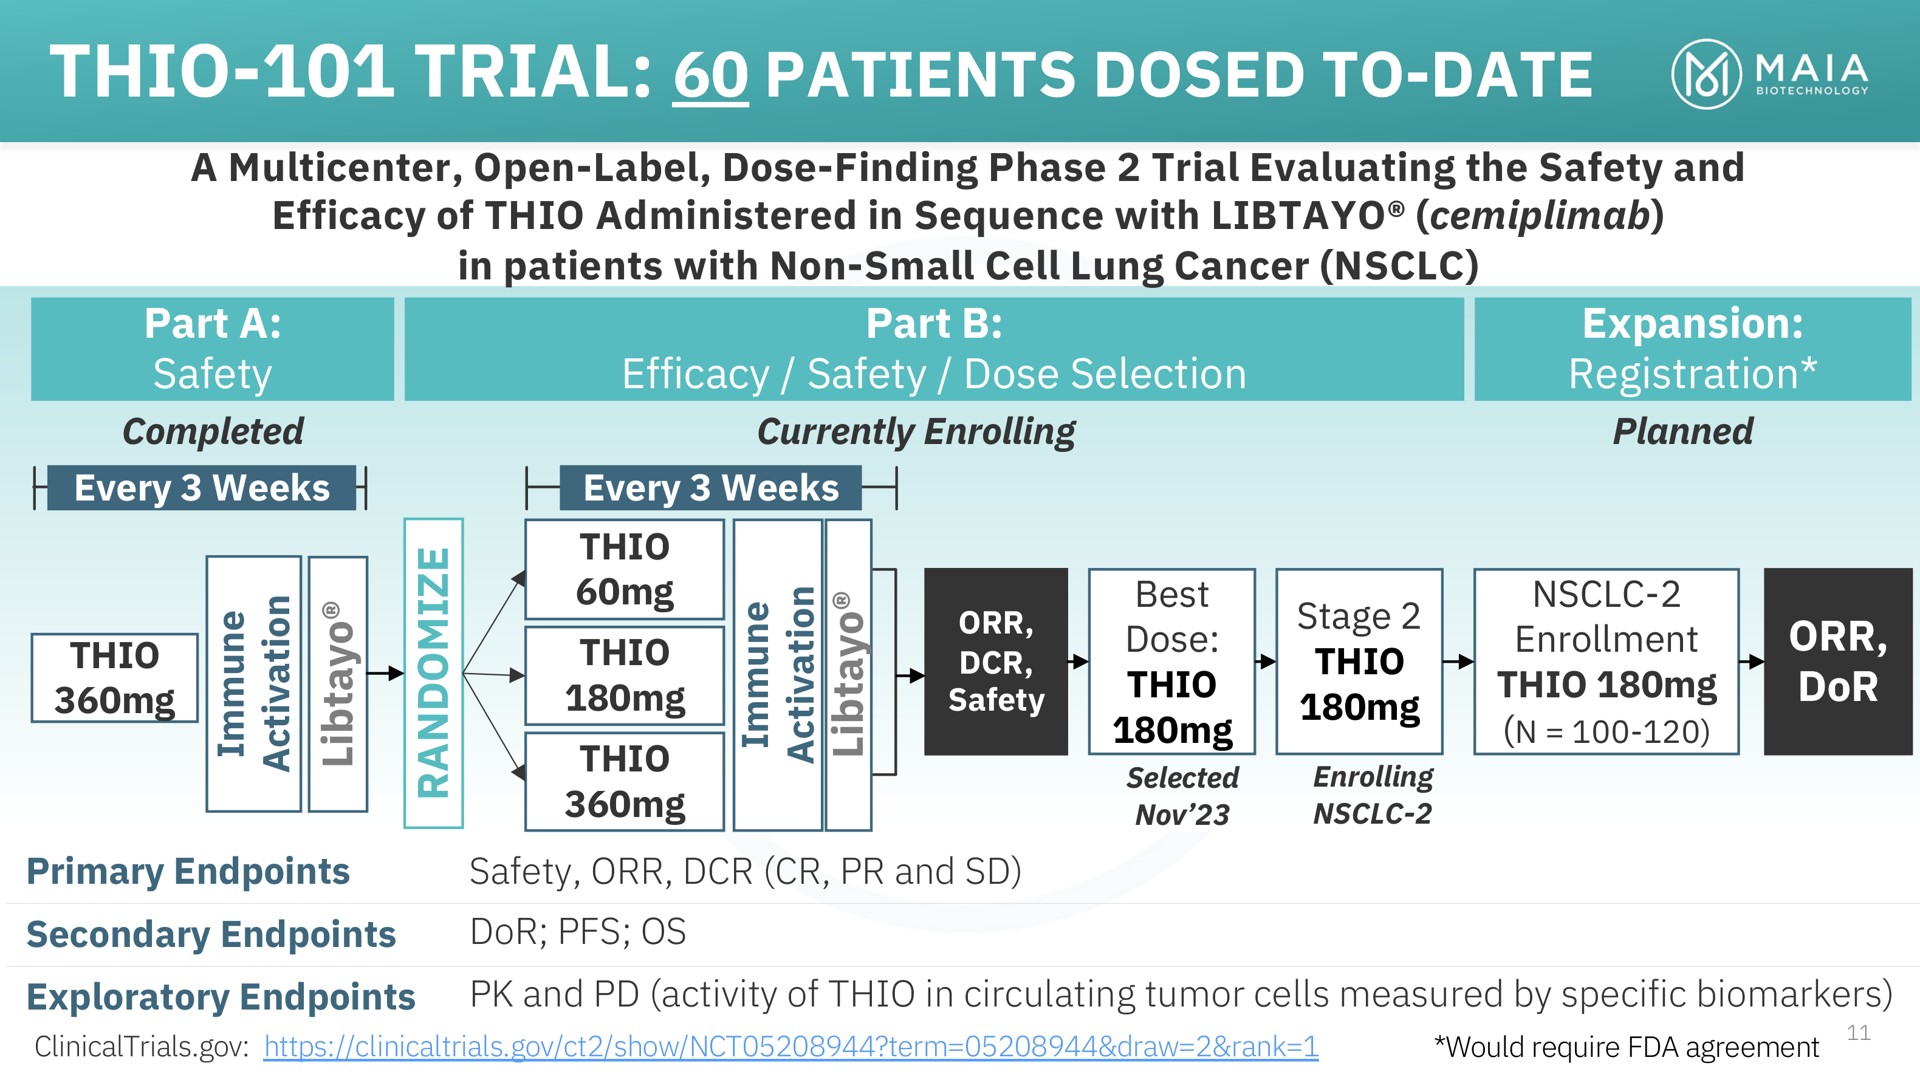 thio trial patients dosed to date | MAIA Biotechnology